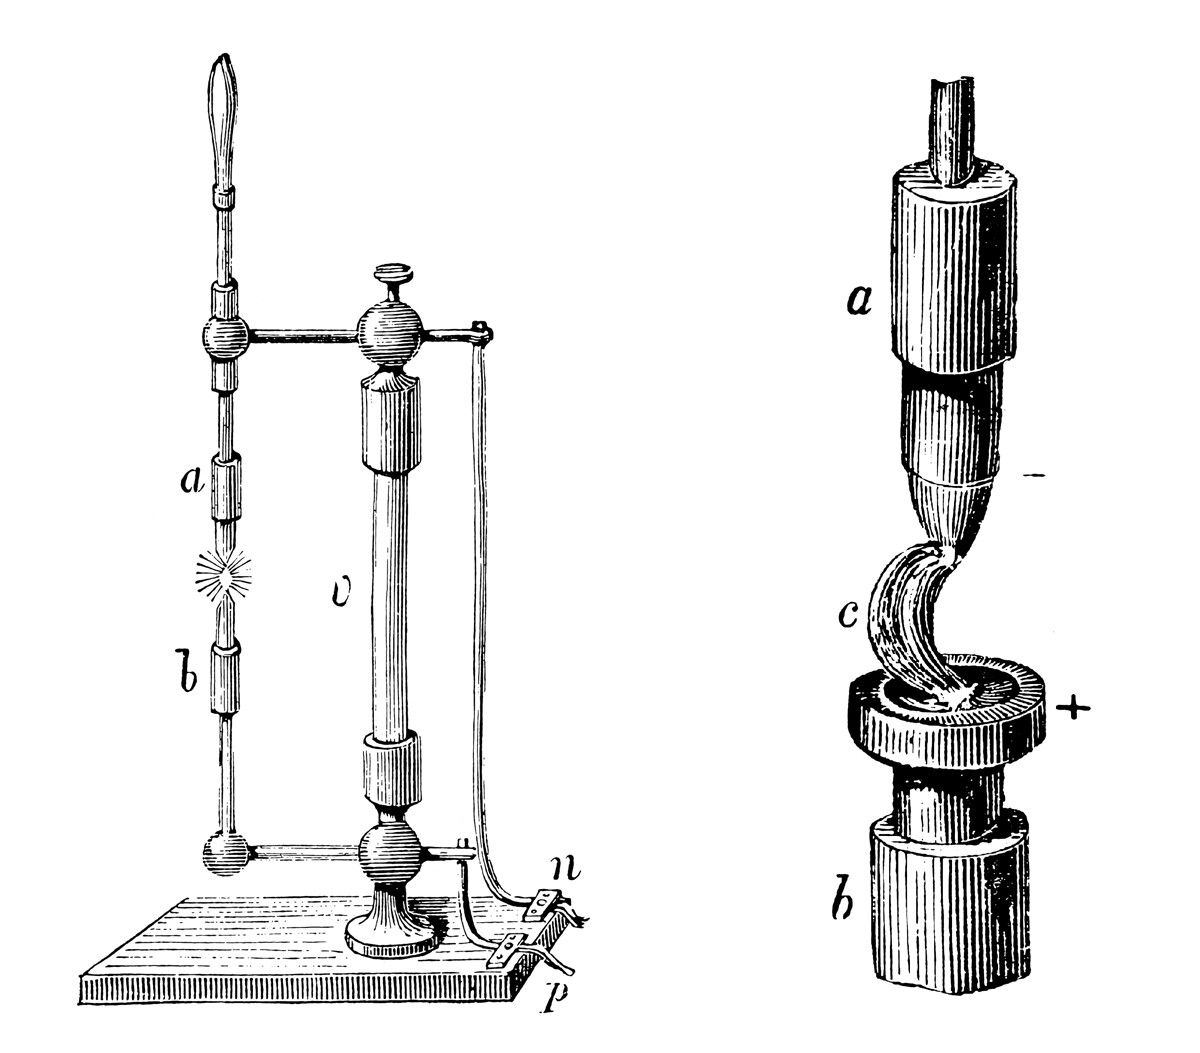 Electric carbon arc lamp, invented in 1876 by Pavel Yablochkov